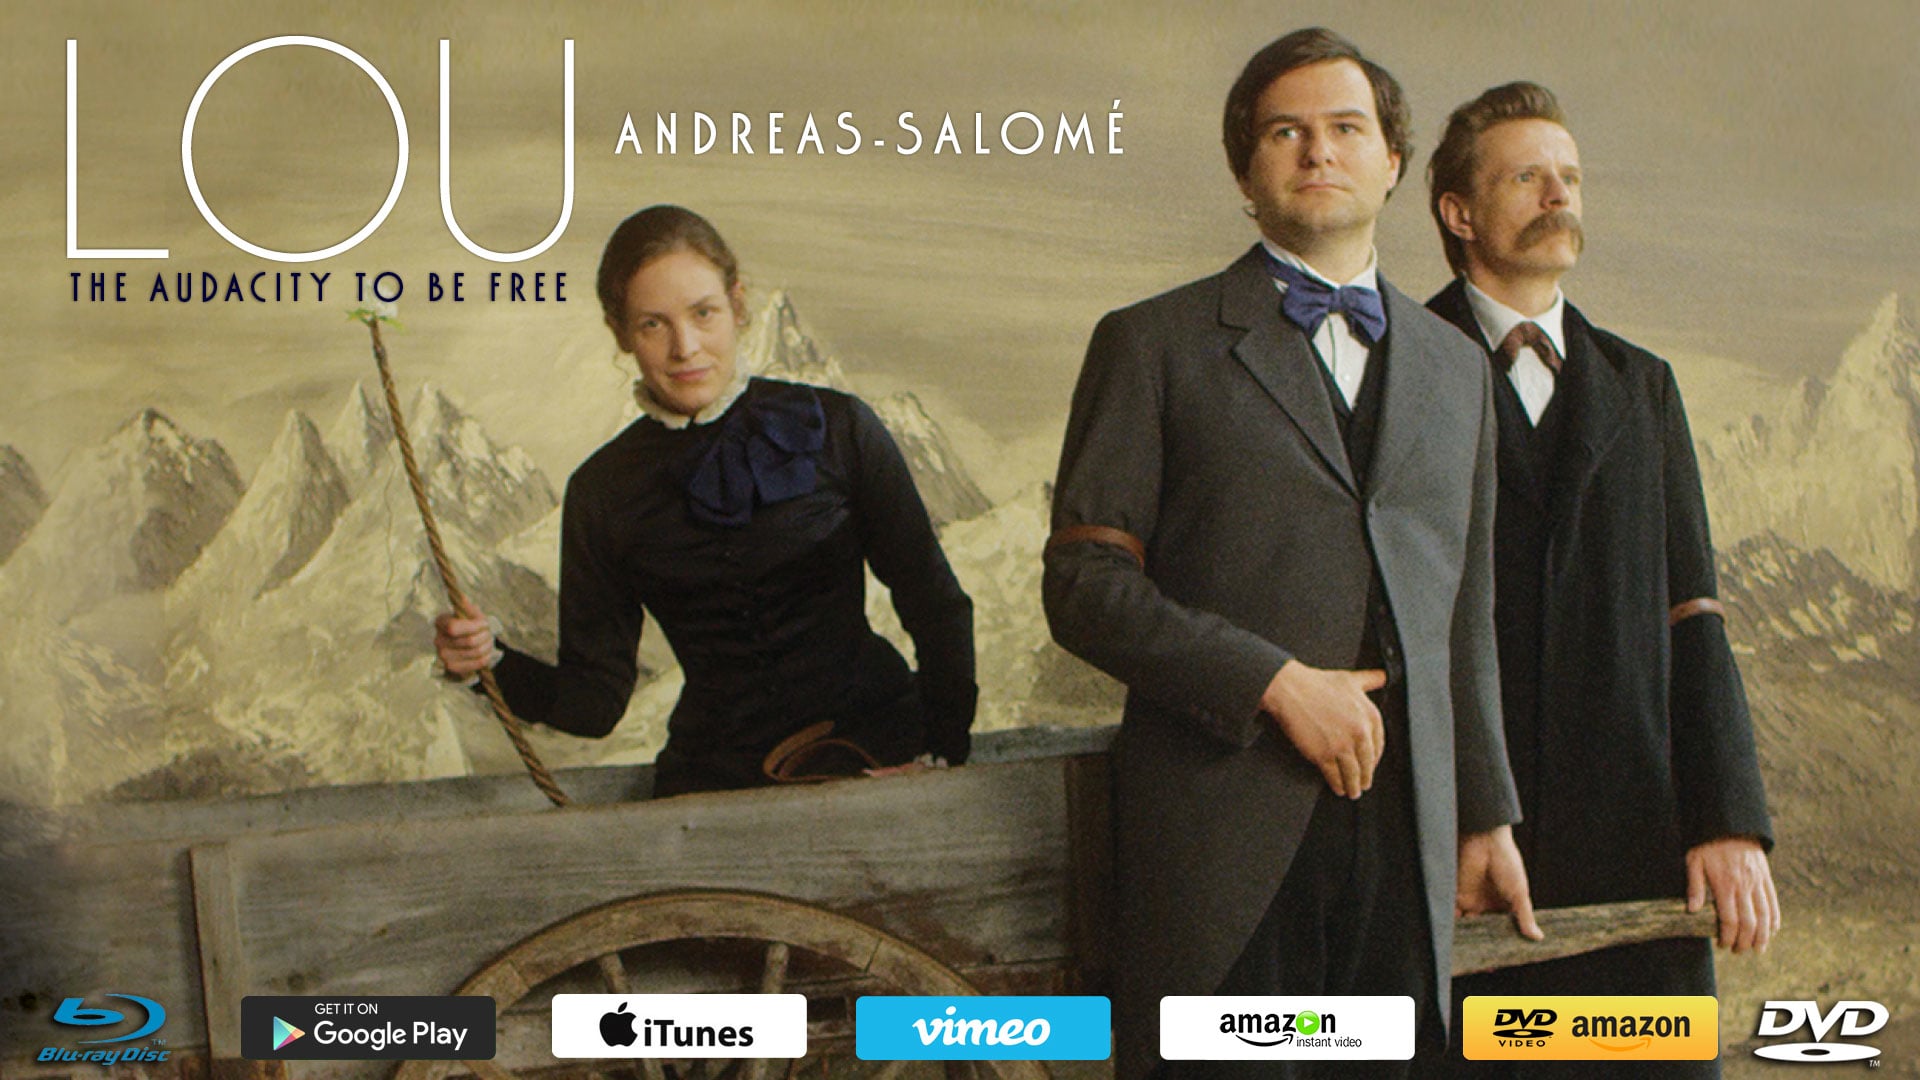 Watch Lou Andreas-Salomé, The Audacity to be Free Online Vimeo On Demand on Vimeo